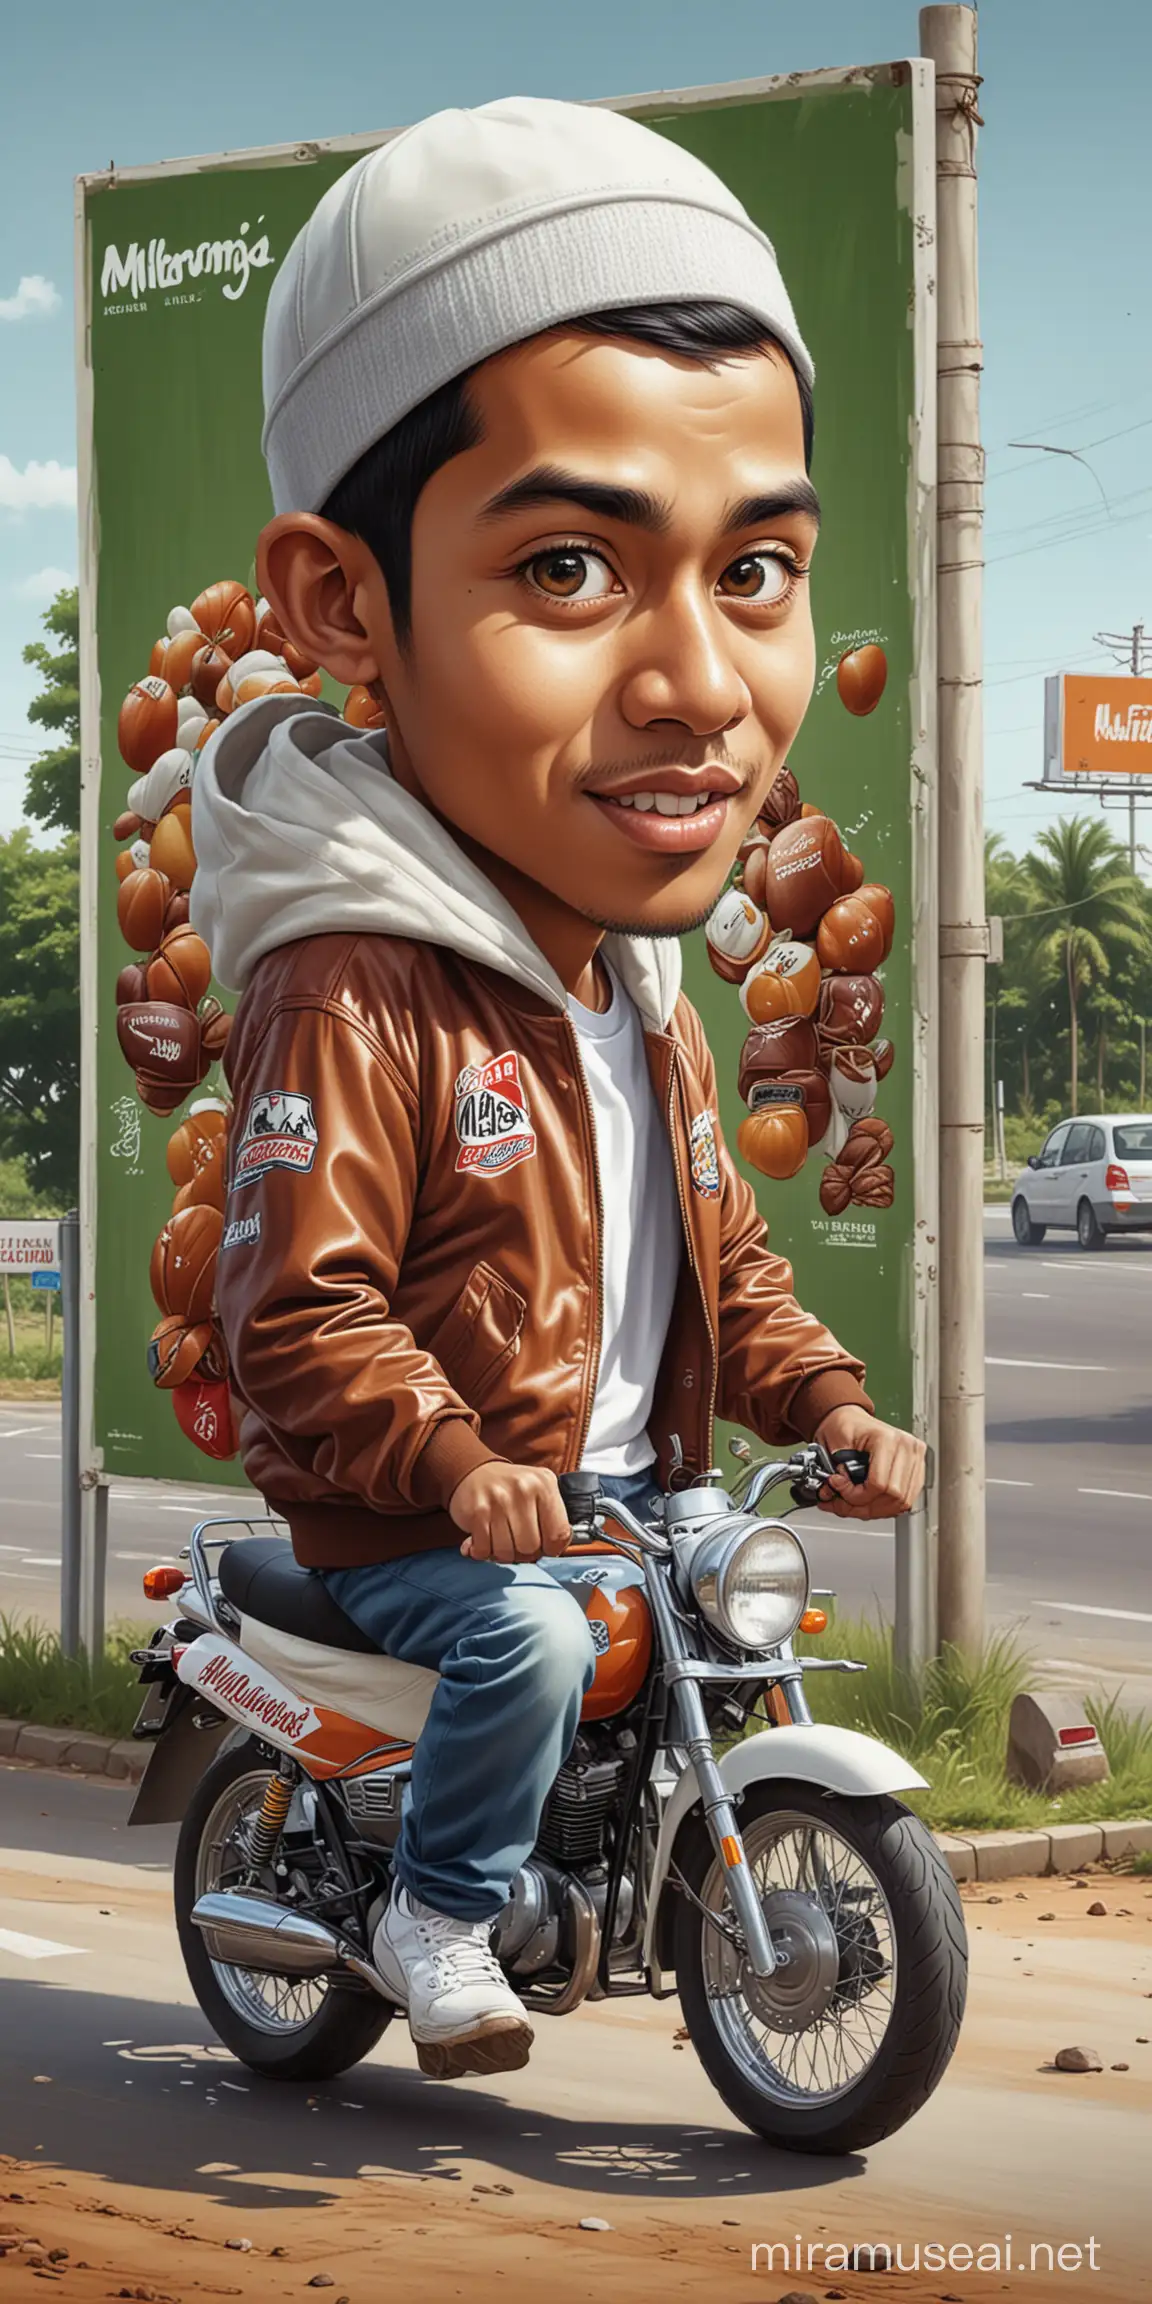 Creators ultra Realistic caricature of a slightly enlarge head of Indonesian youth muslim wearing a varsity jacket that says " Marrons ", white sneakers. riding a big sport motorbike, on a busy rural road, there is a billboard that says " MELONG ". Dramatic effects, ultra detailed caricatures,ultra realistic photos.